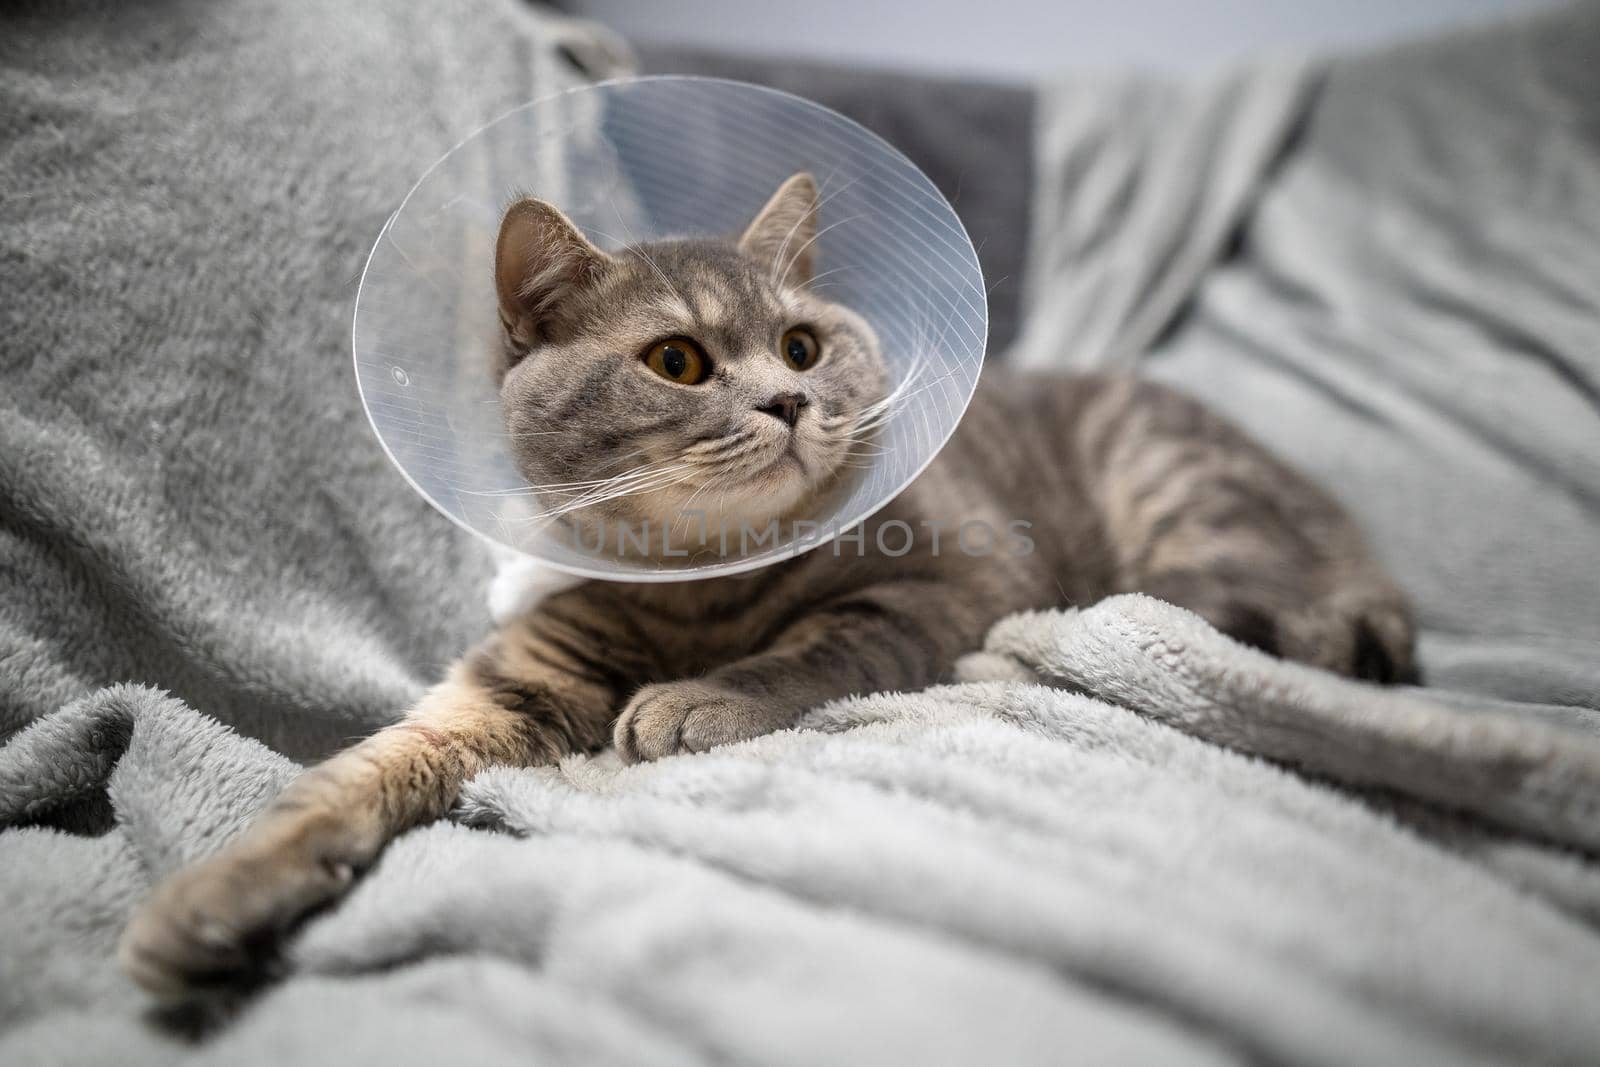 Tired cat gray Scottish Straight breed resting with veterinairy cone after surgery at home on the couch. Animal healthcare concept. After surgery cat's recovery in or E-Collar. Elizabethan Collar by Tomashevska